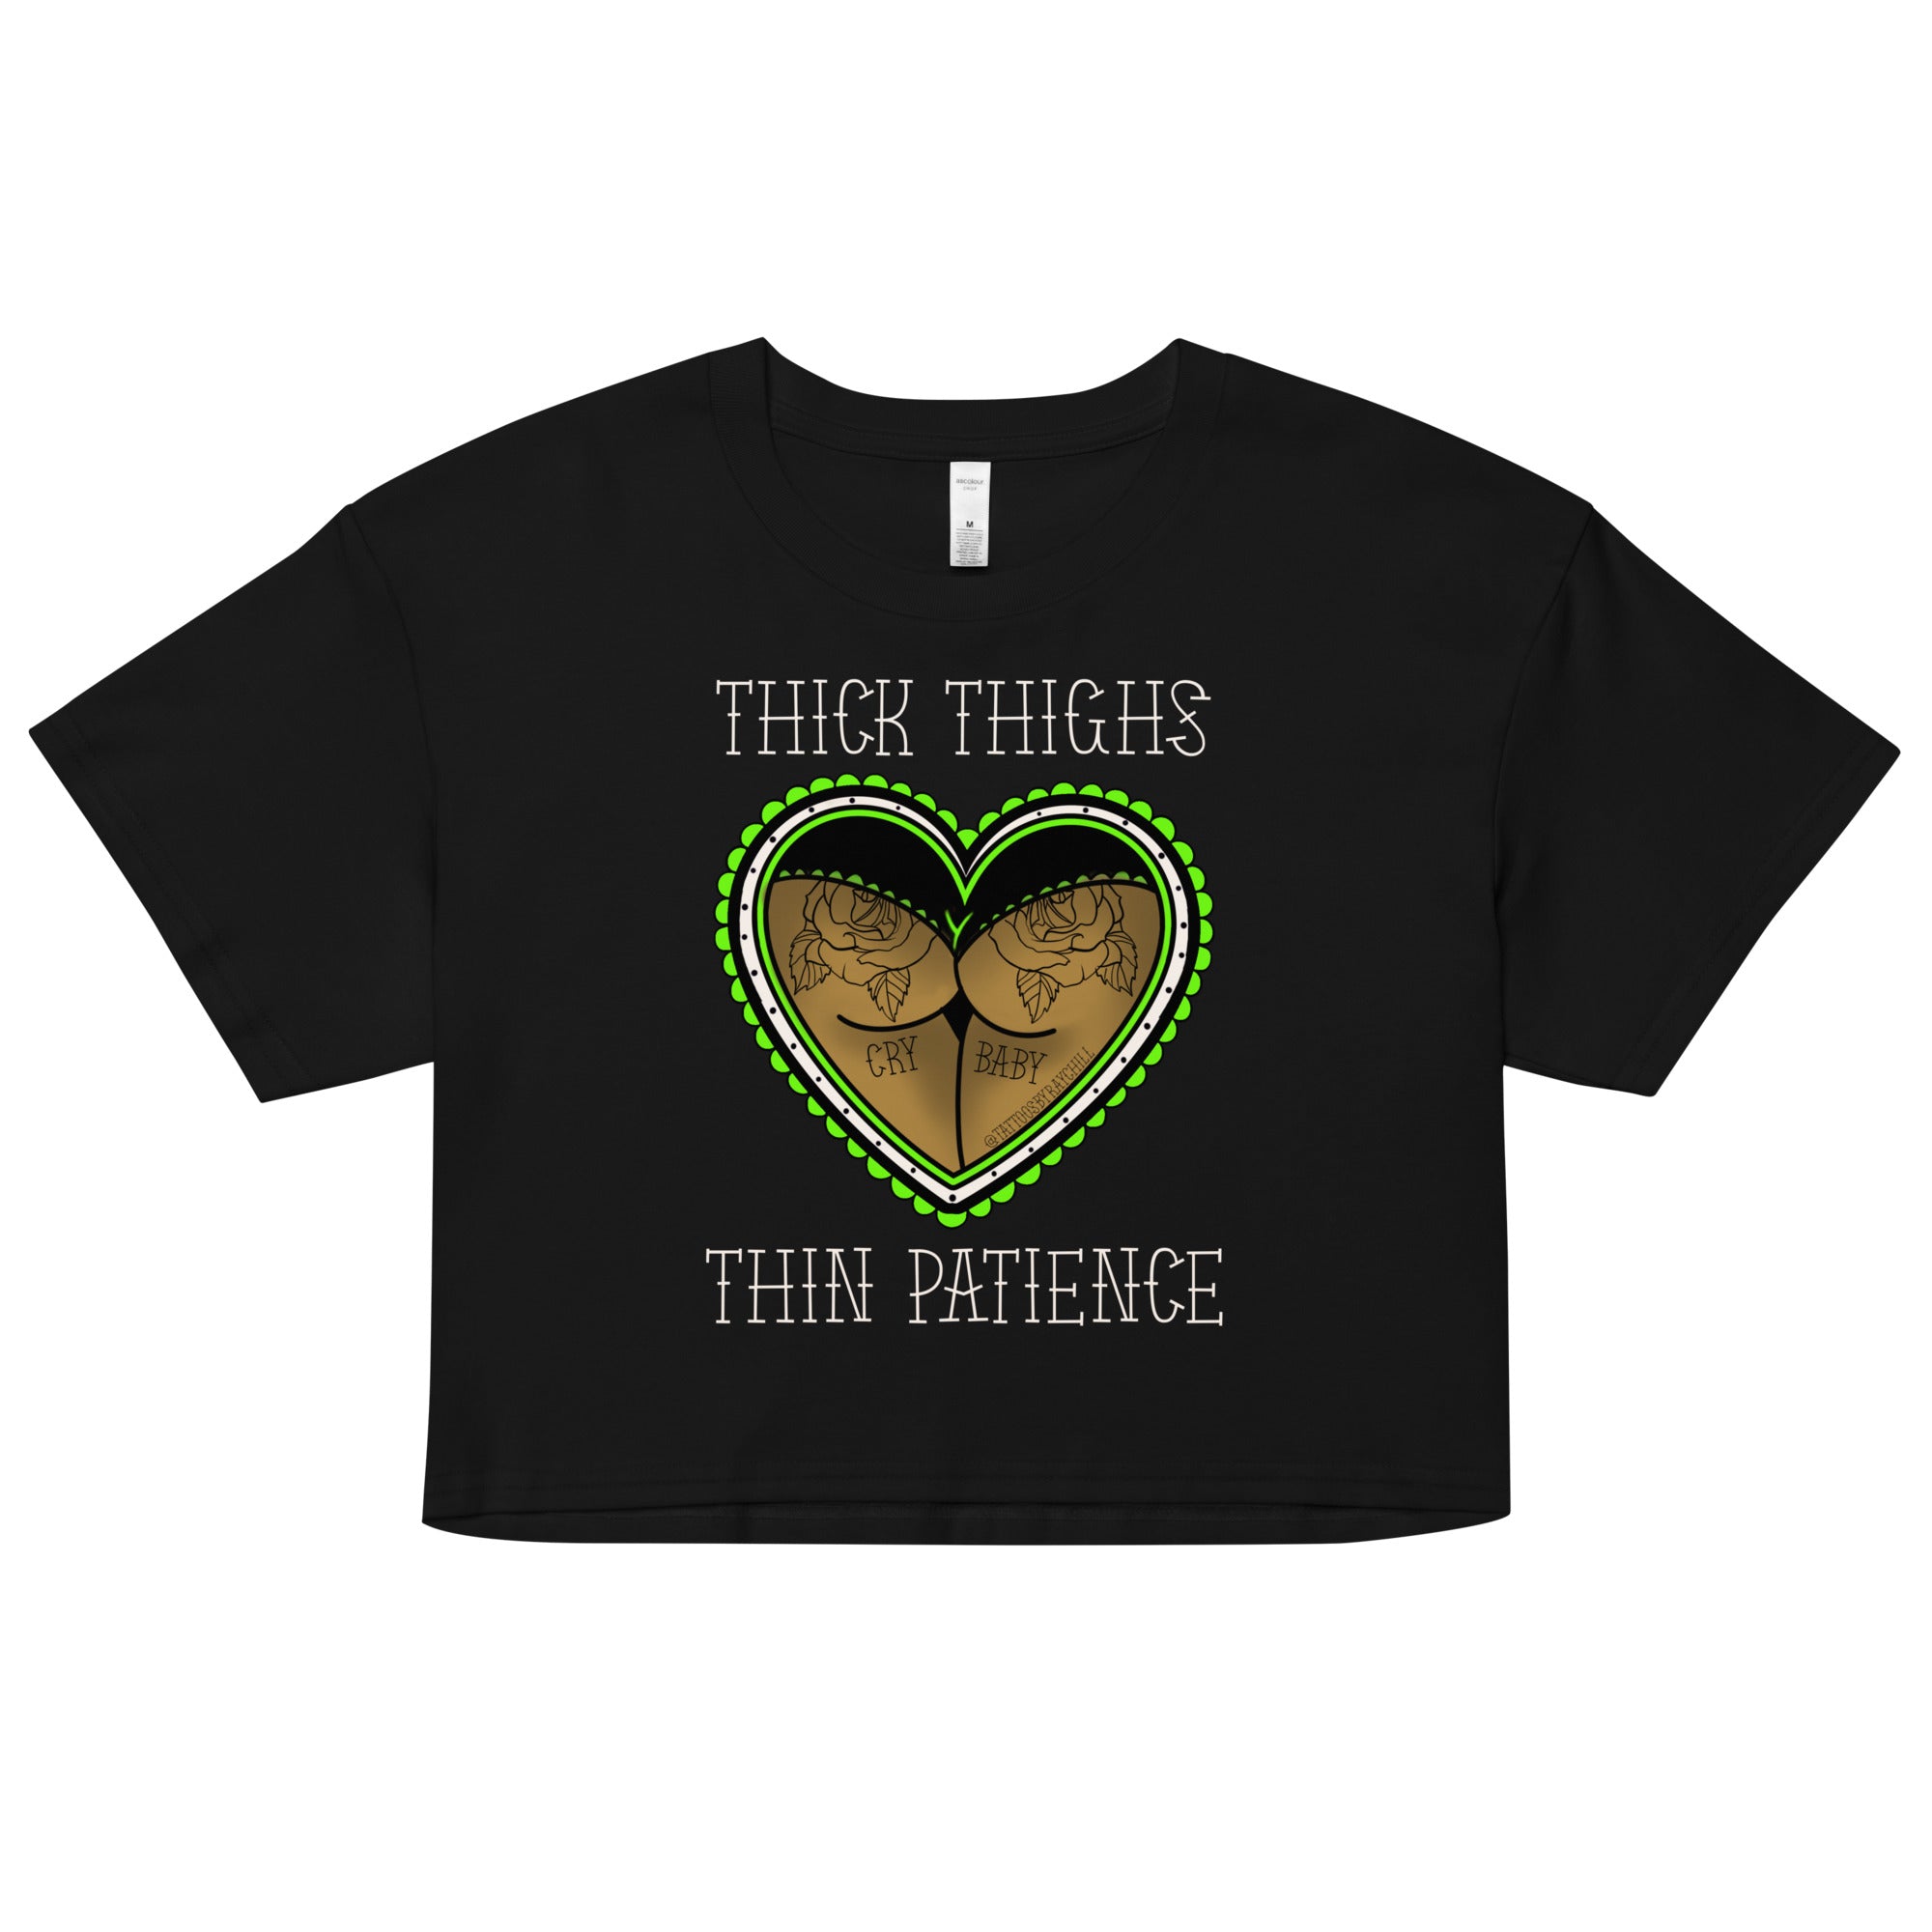 Thick Thighs Thin Patience Funny Gym Women's T-Shirt Tee